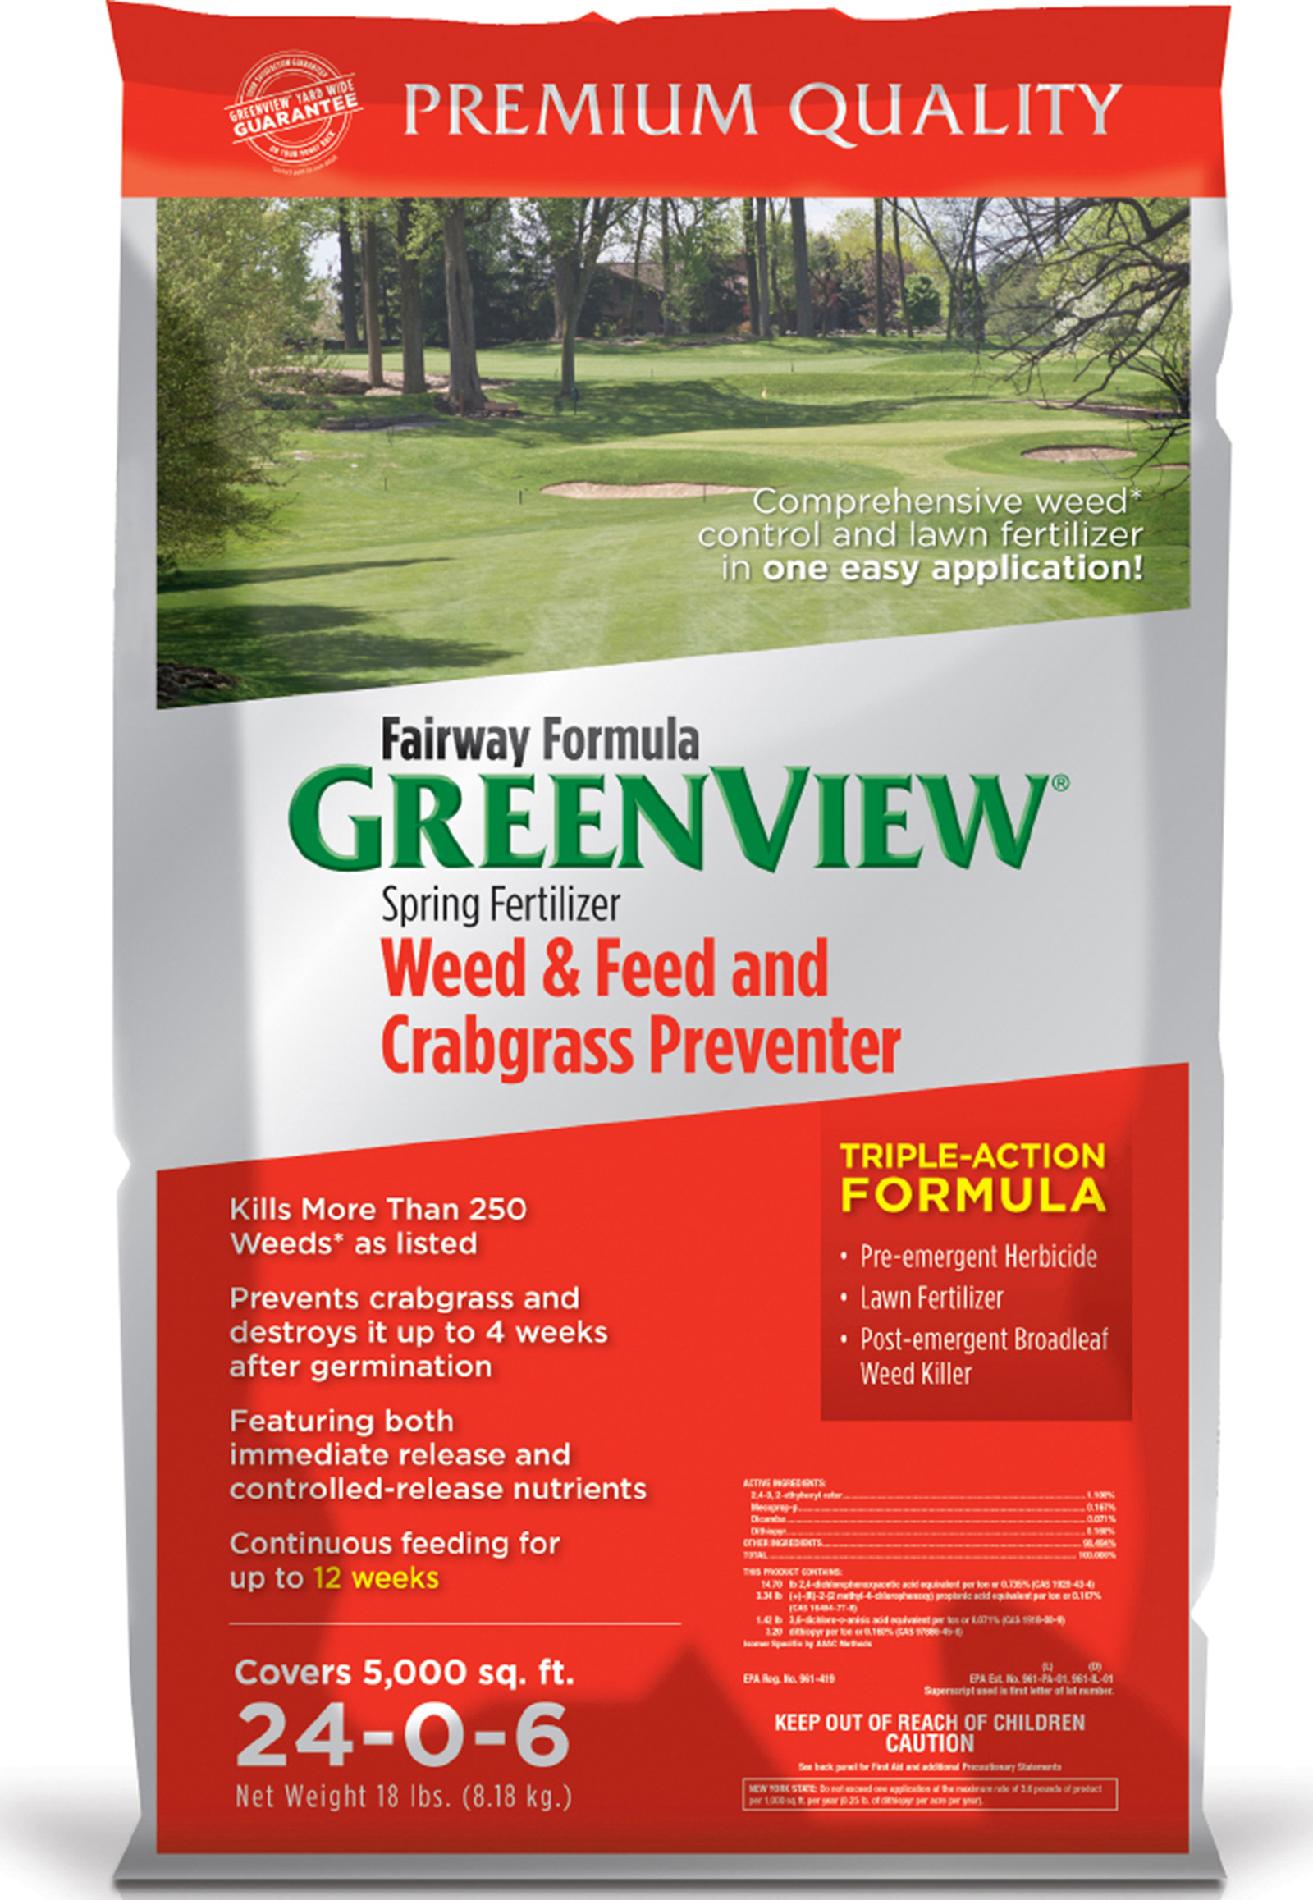 Greenview G81 2129172 18 lb. Fairway Formula Spring Fertilizer Weed and Feed and Crabgrass Preventer